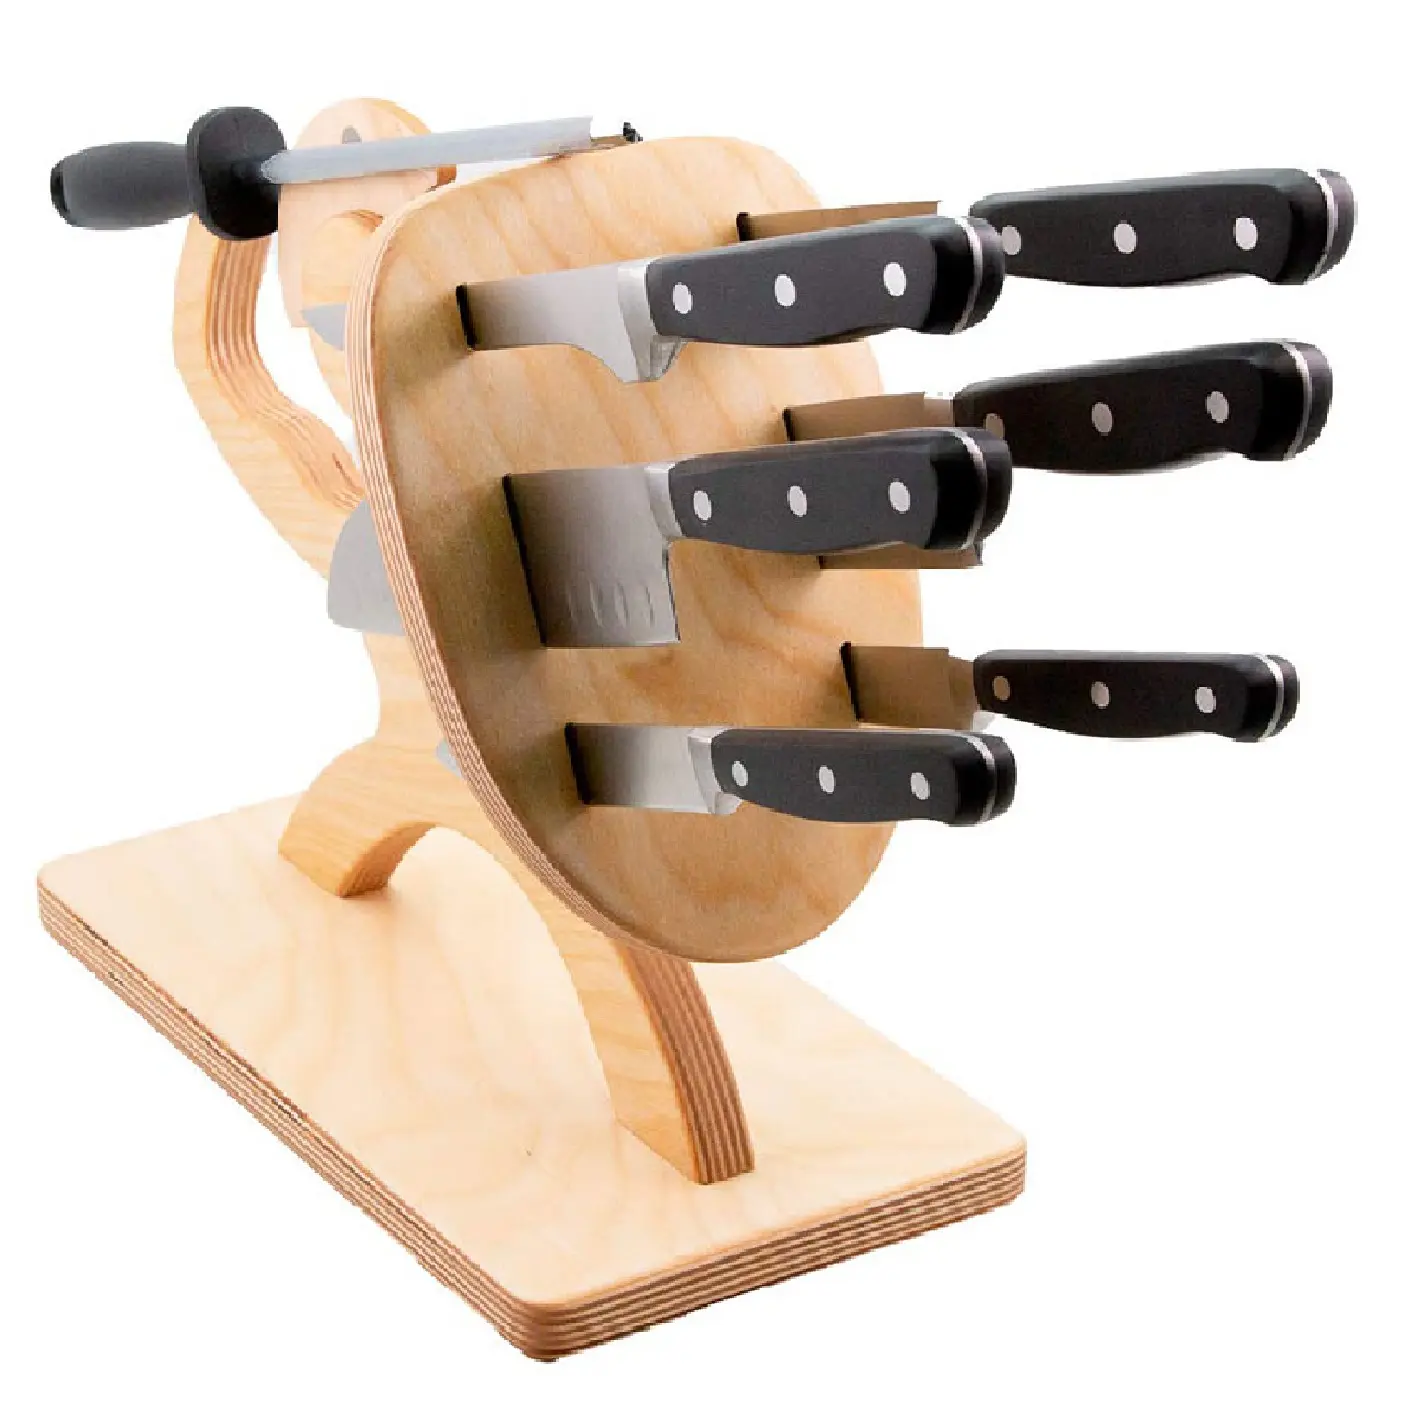 Wood Knives Stand Restaurant Knives Holder Knife Block For Safe Storage Tabletop Kitchen Utensil And Accessories